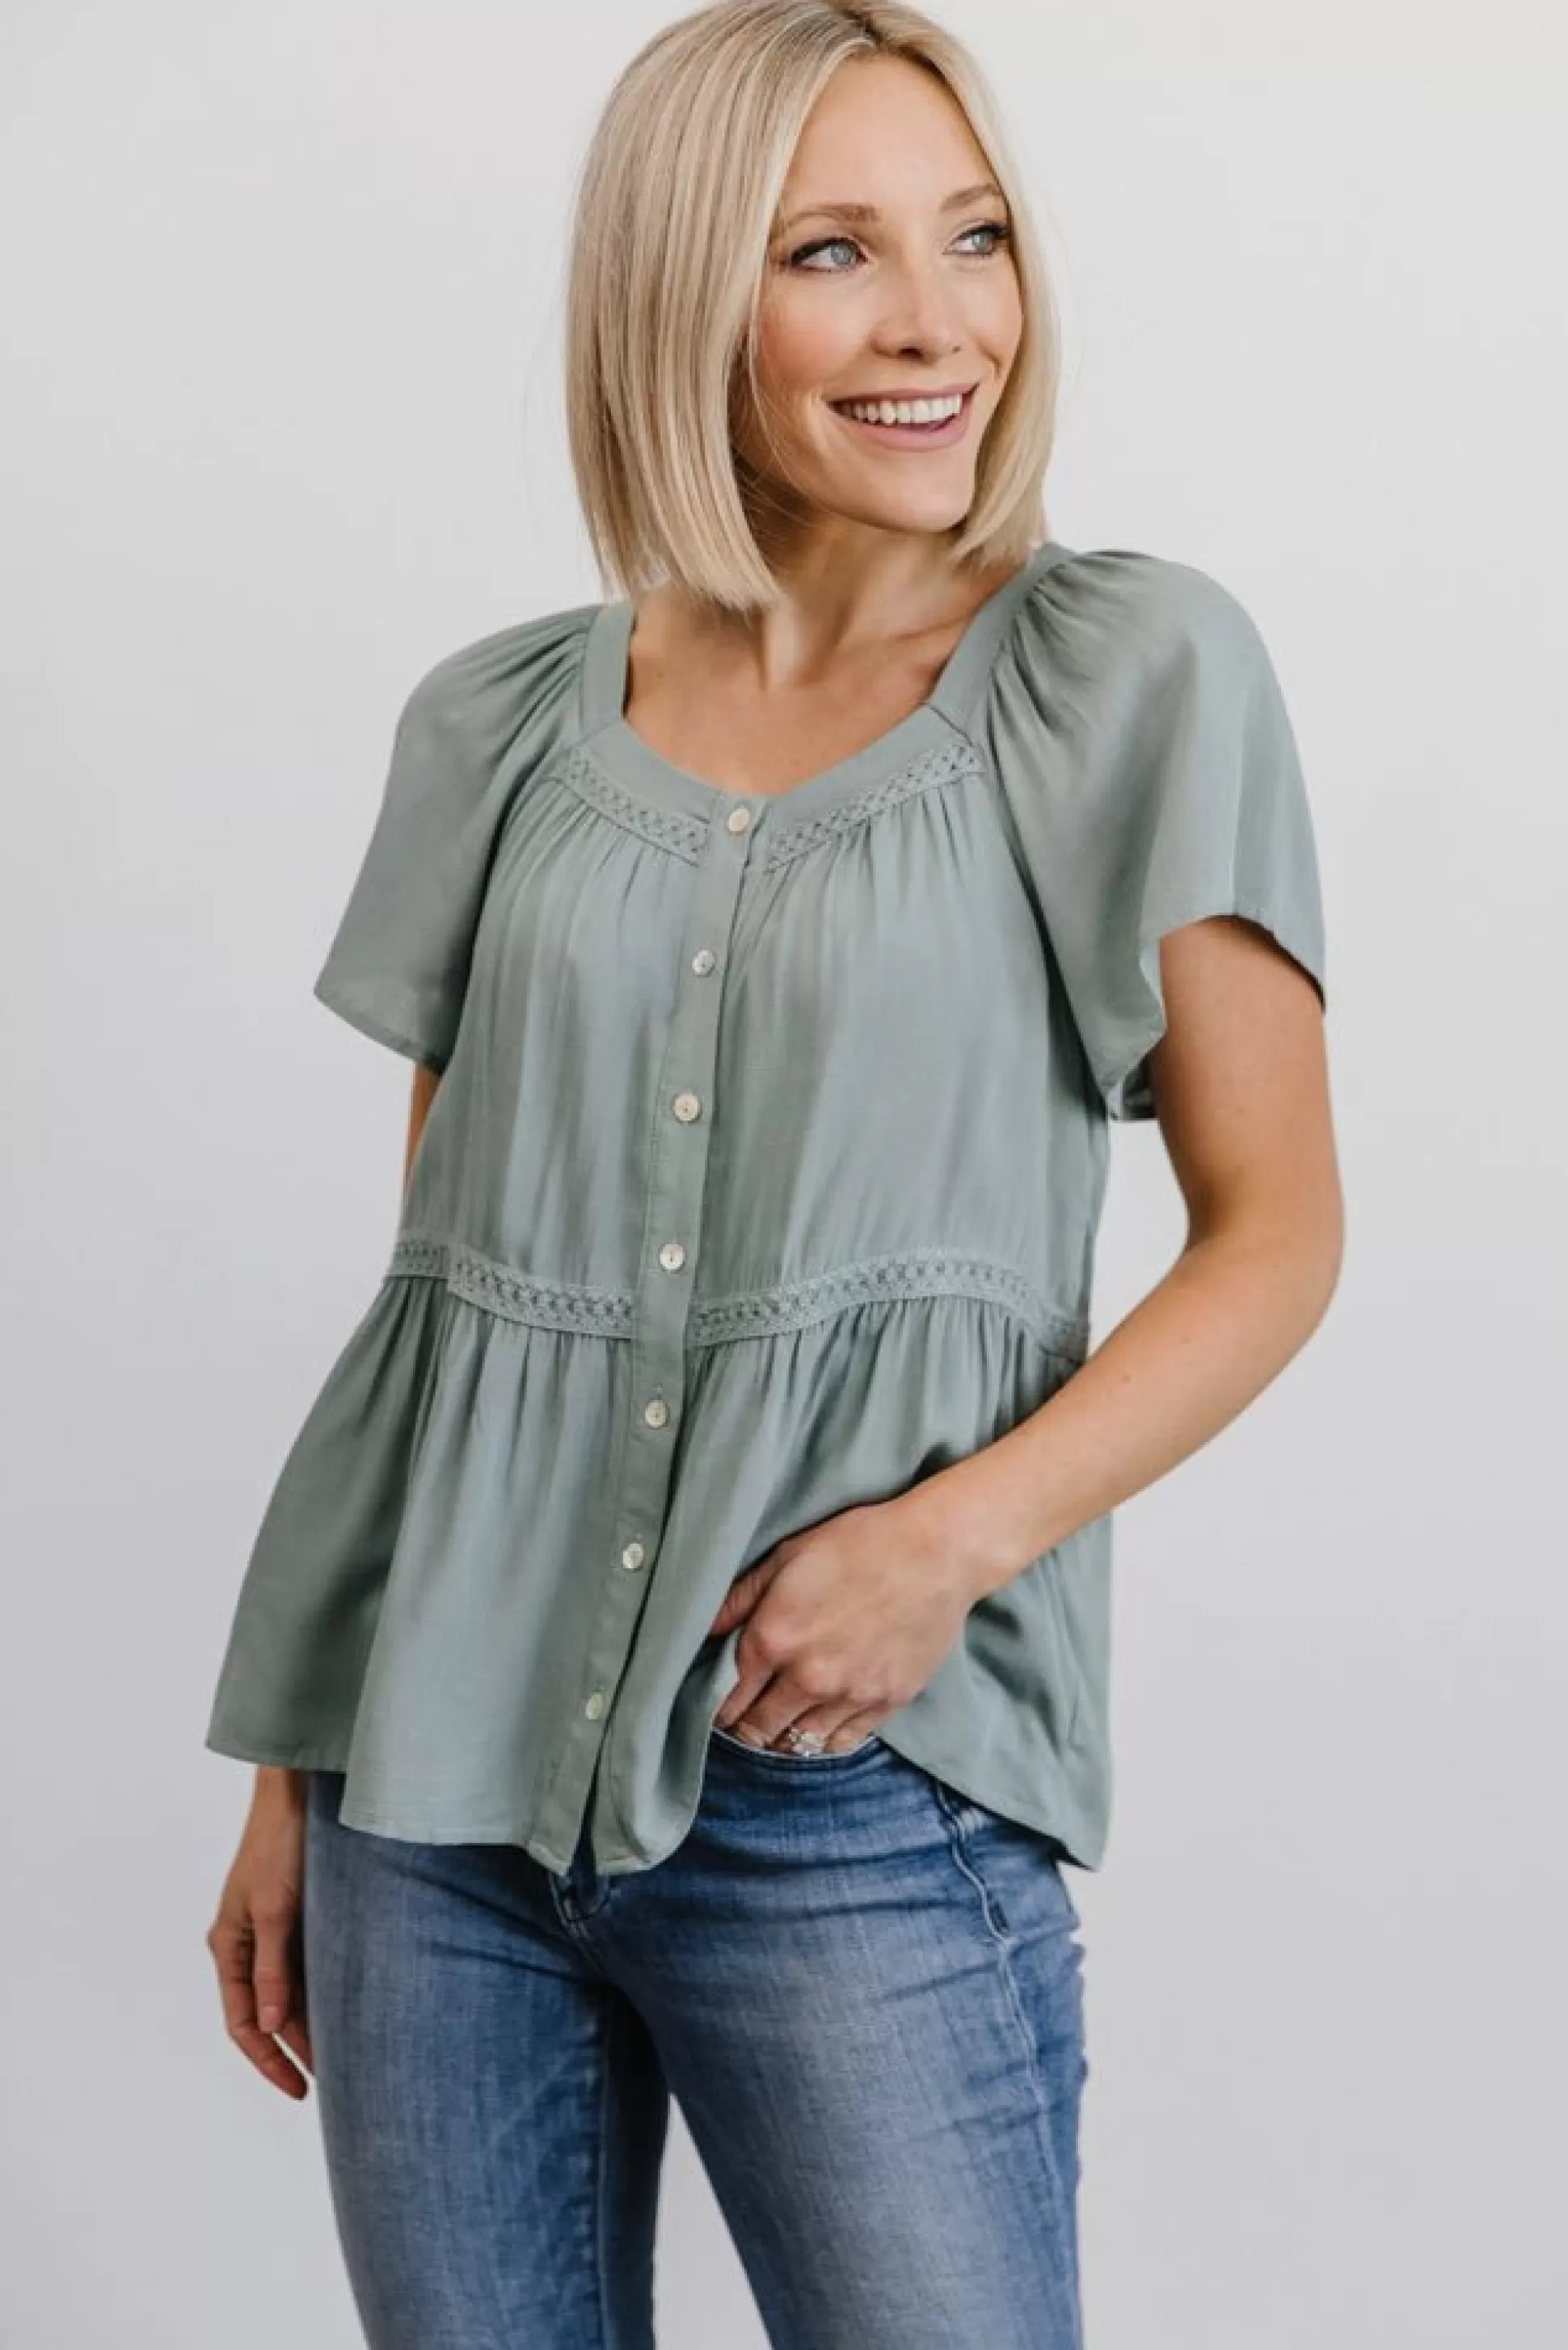 blouses + shirts | EXTENDED SIZING | Baltic Born Unity Button Up Top | Sage